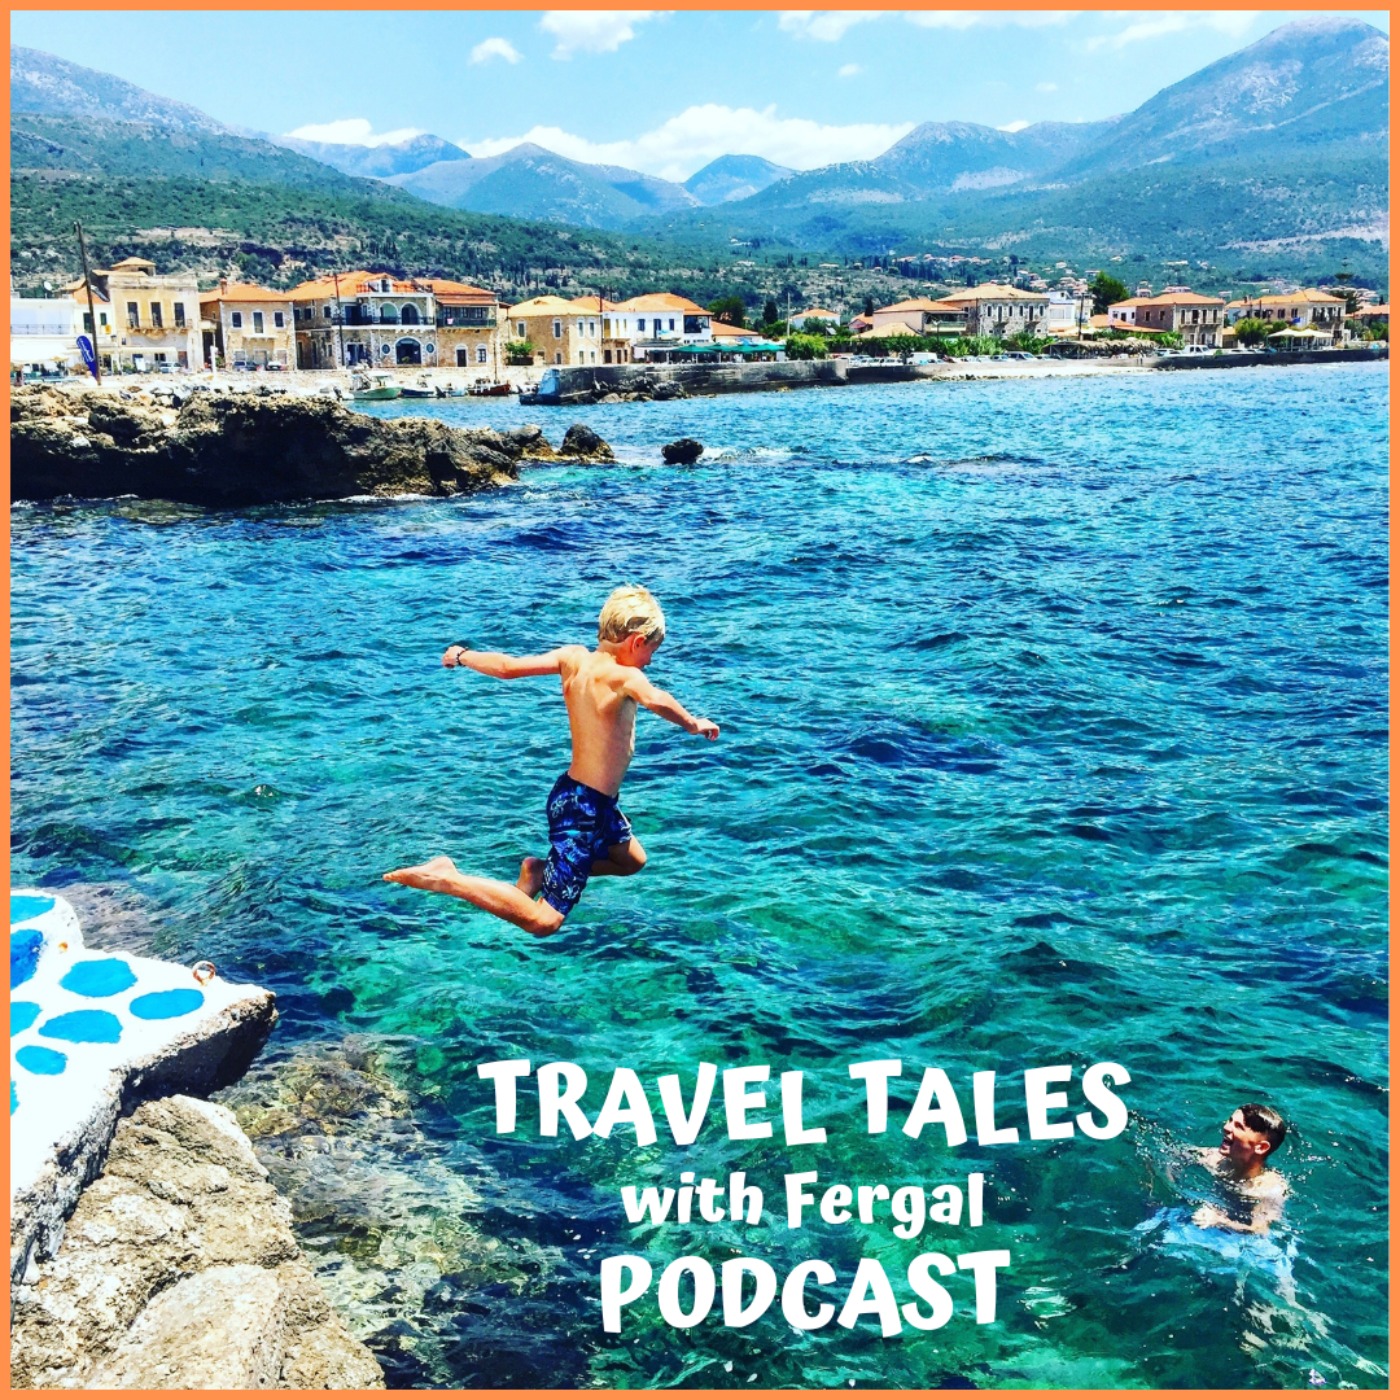 Travel Tales with Fergal podcast show image